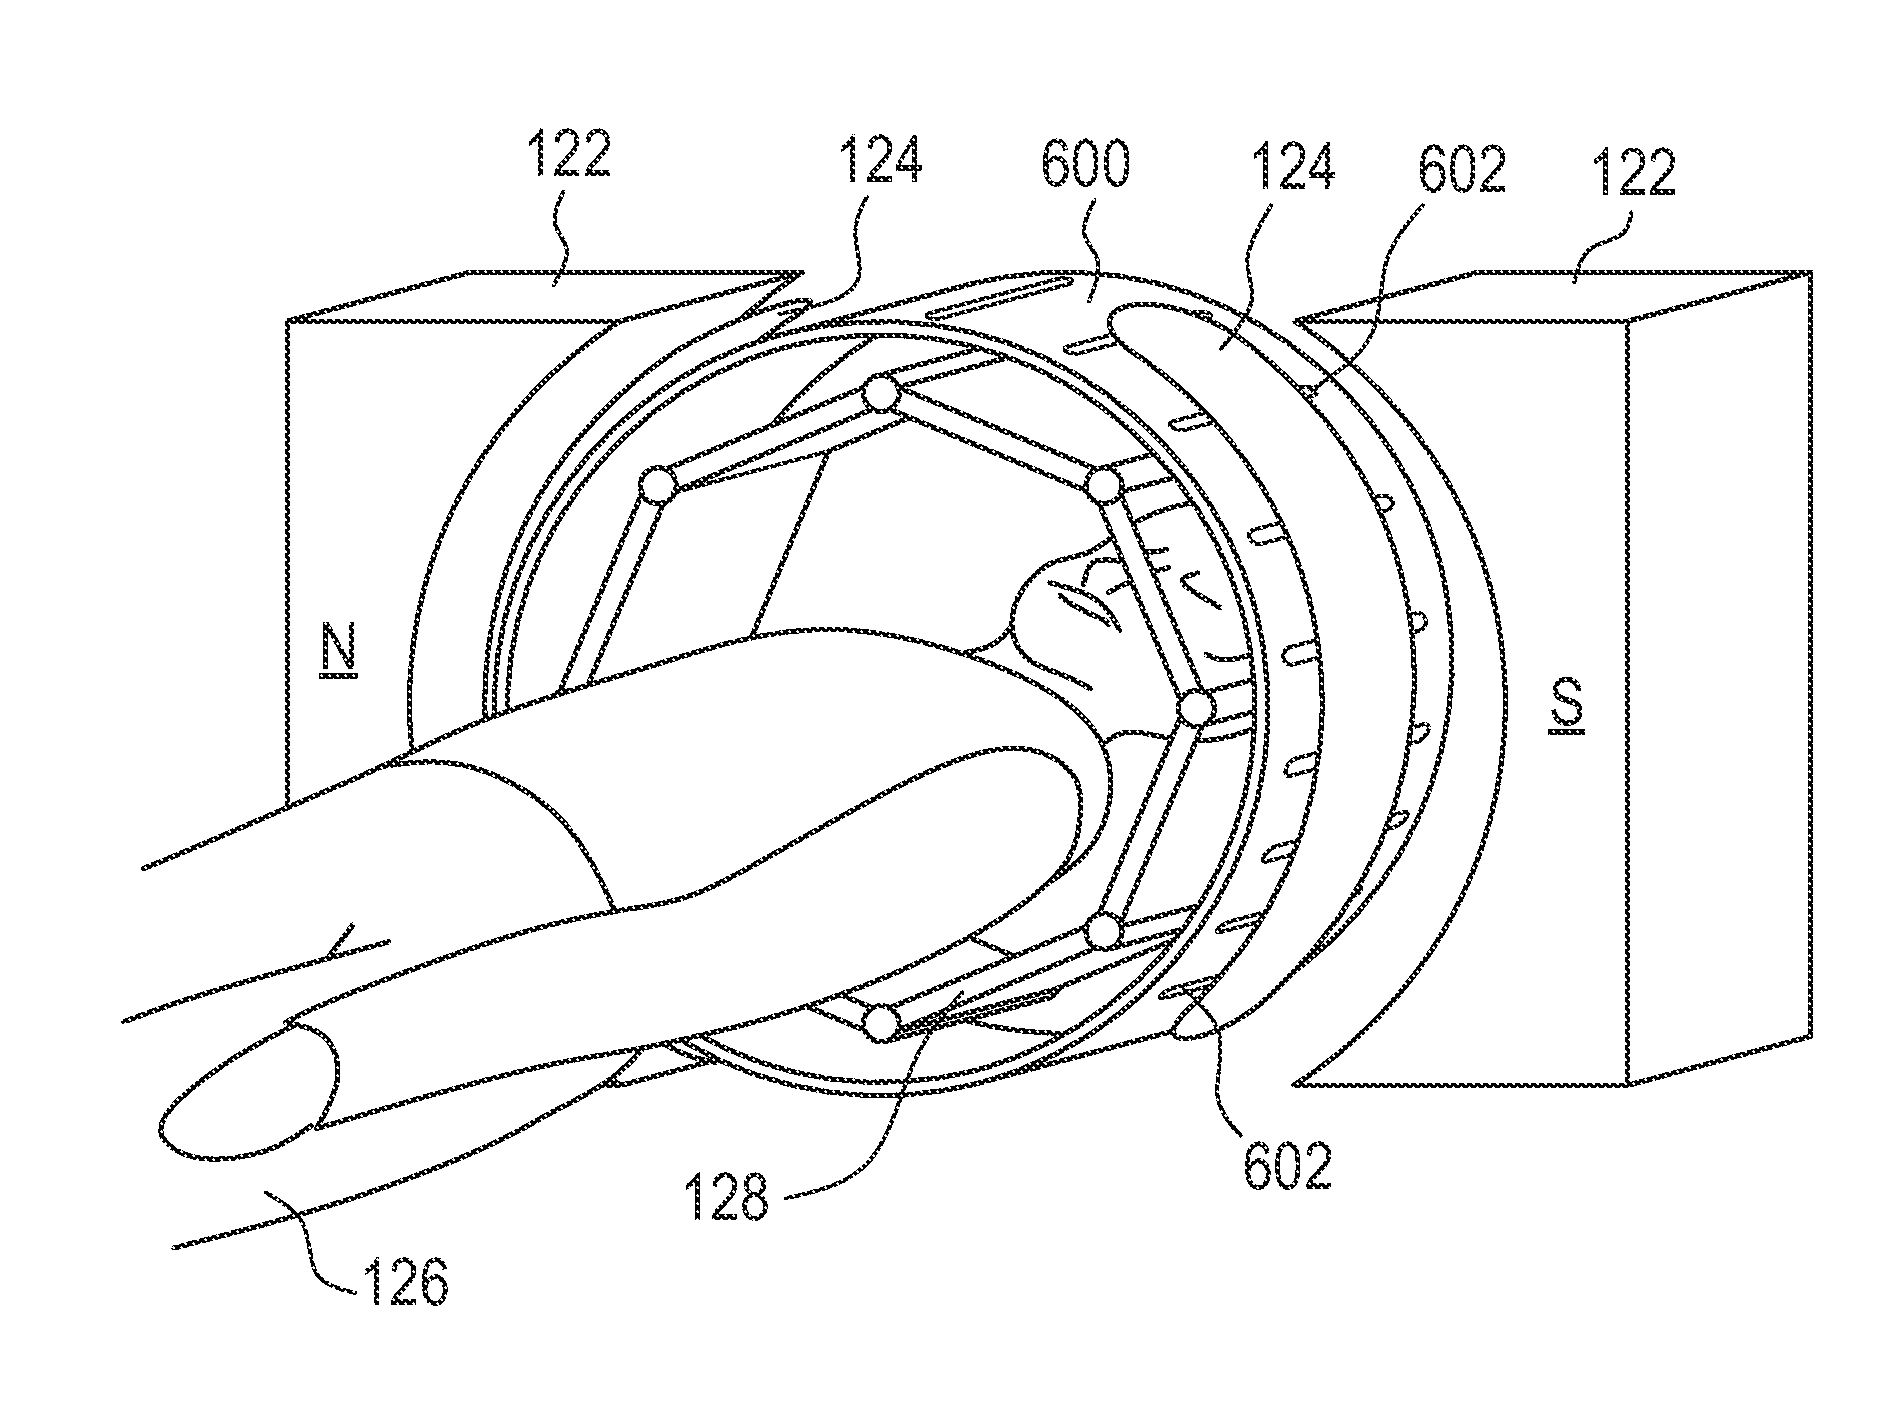 Inductively powered electric component of an MRI apparatus